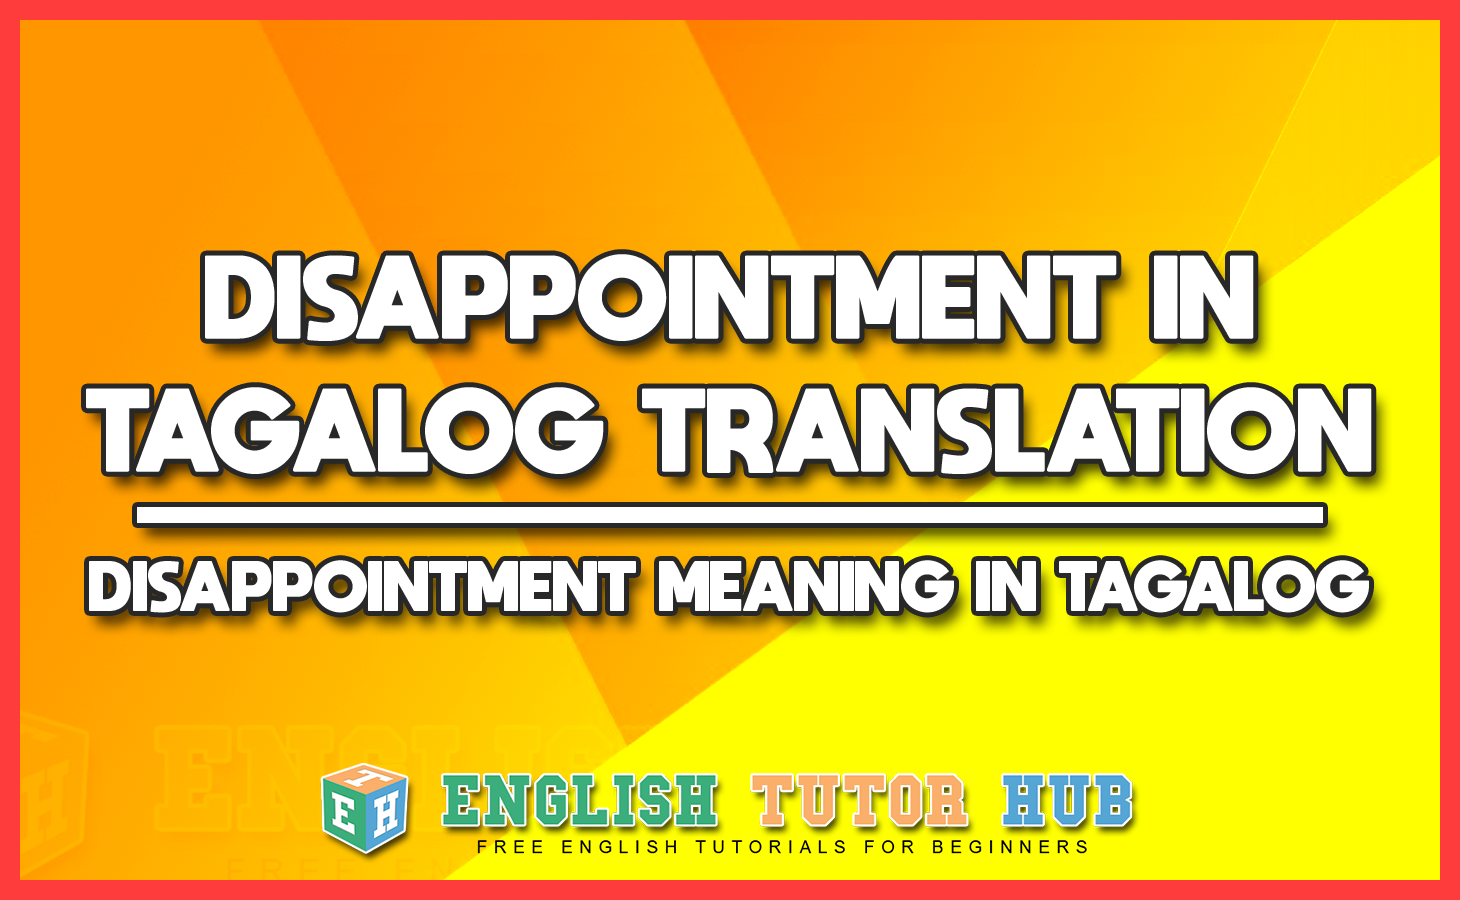 DISAPPOINTMENT IN TAGALOG TRANSLATION - DISAPPOINTMENT MEANING IN TAGALOG